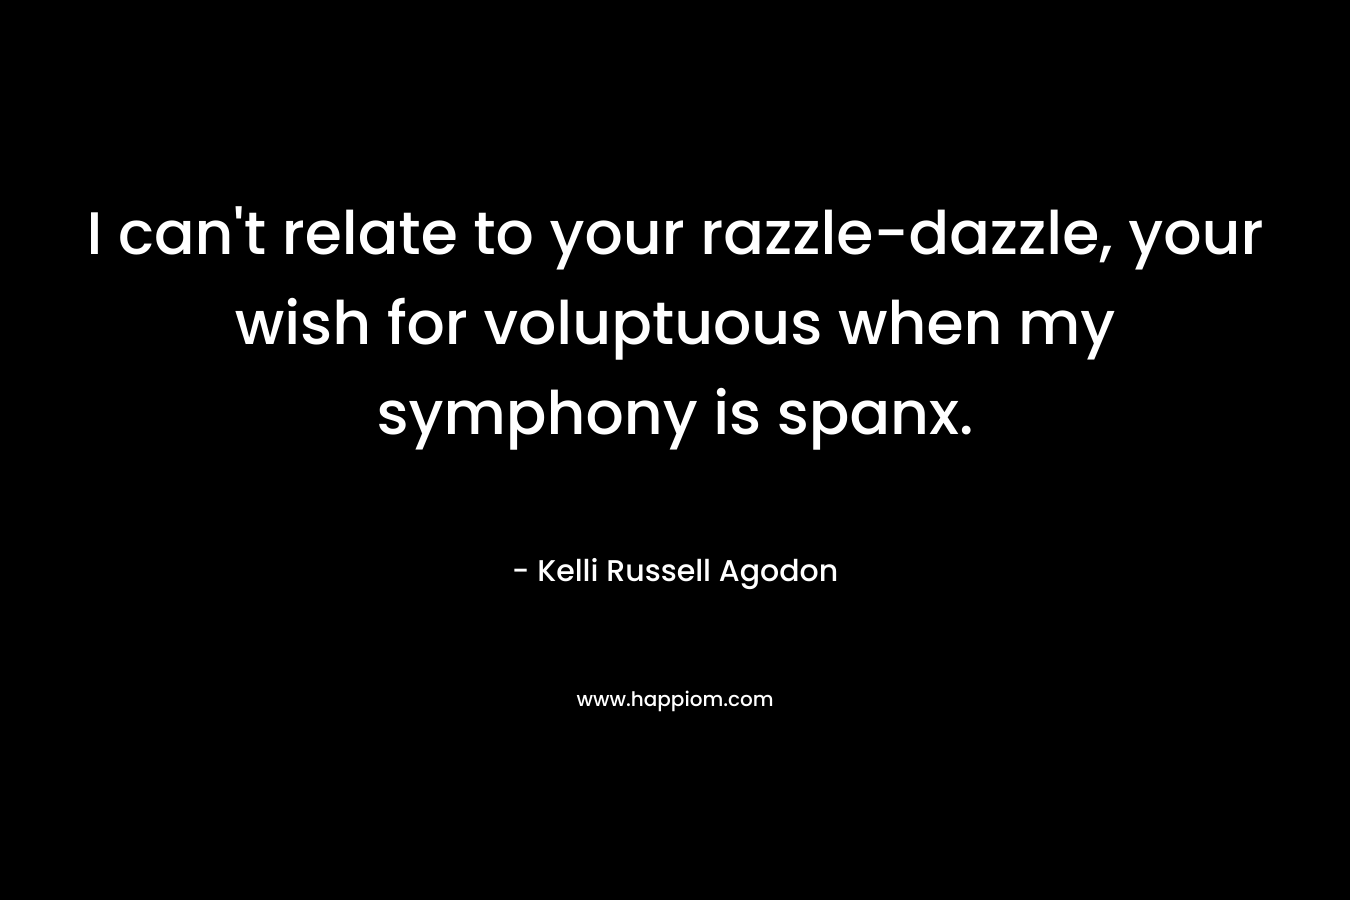 I can't relate to your razzle-dazzle, your wish for voluptuous when my symphony is spanx.